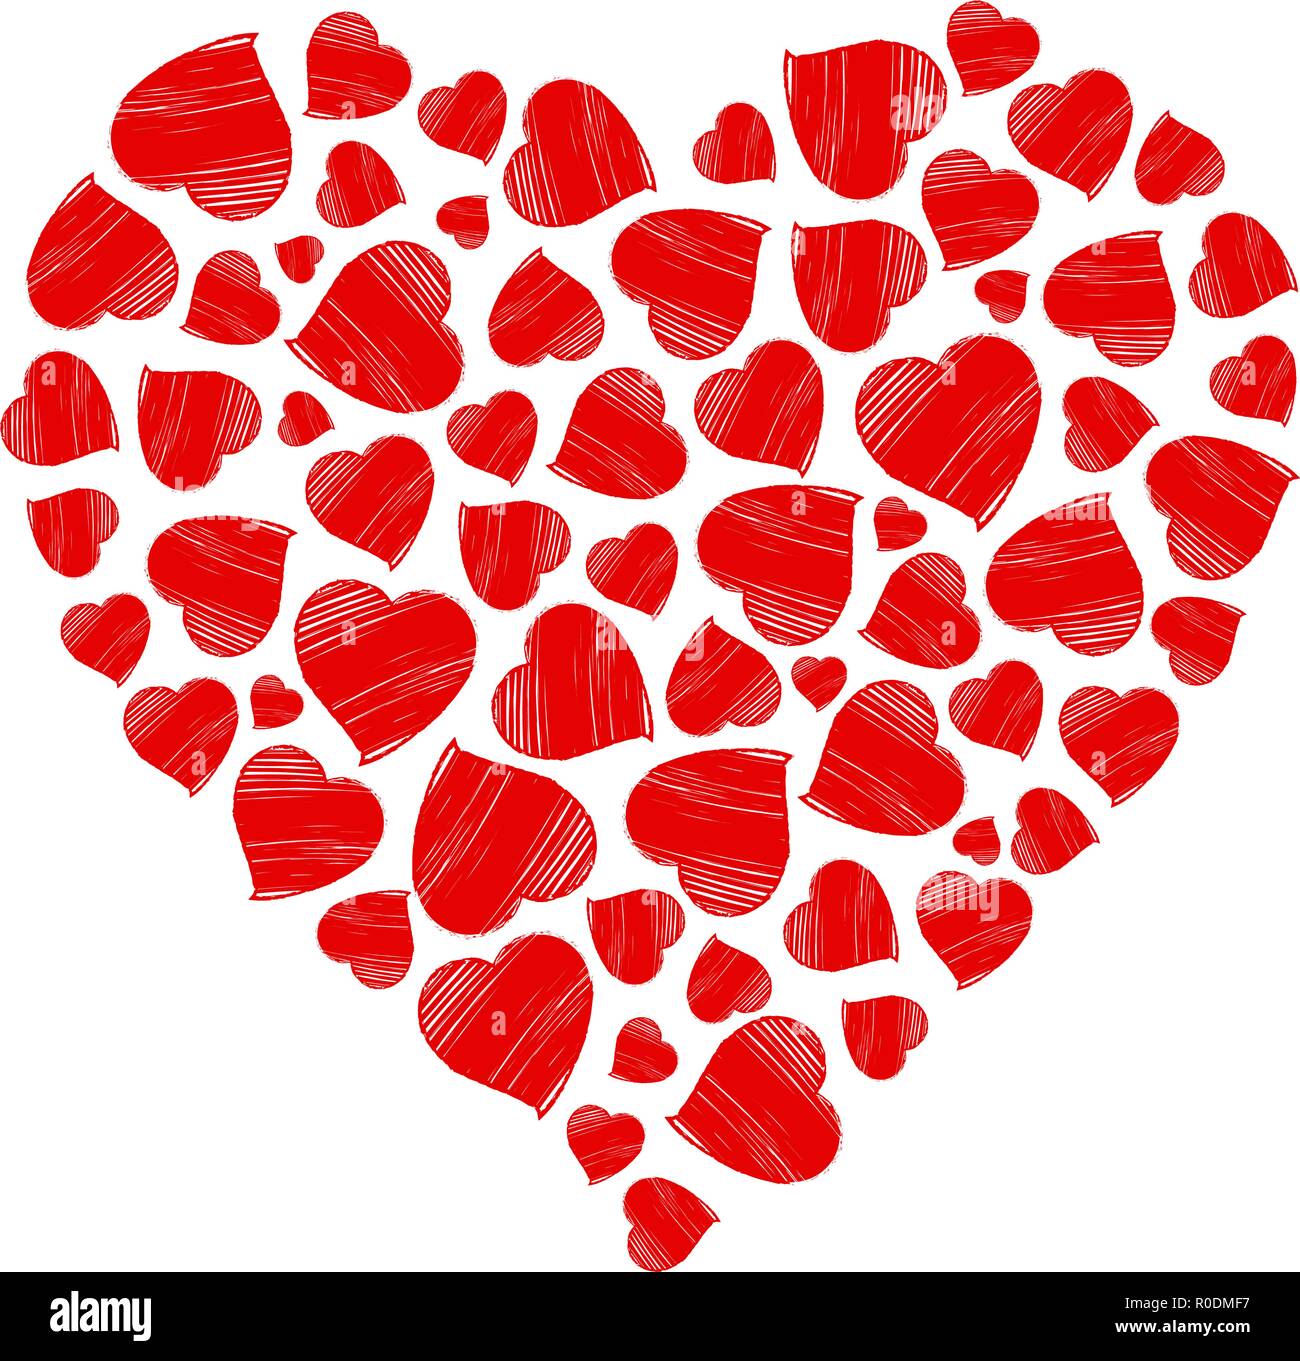 Heart made of hand drawn red hearts. Stock Vector